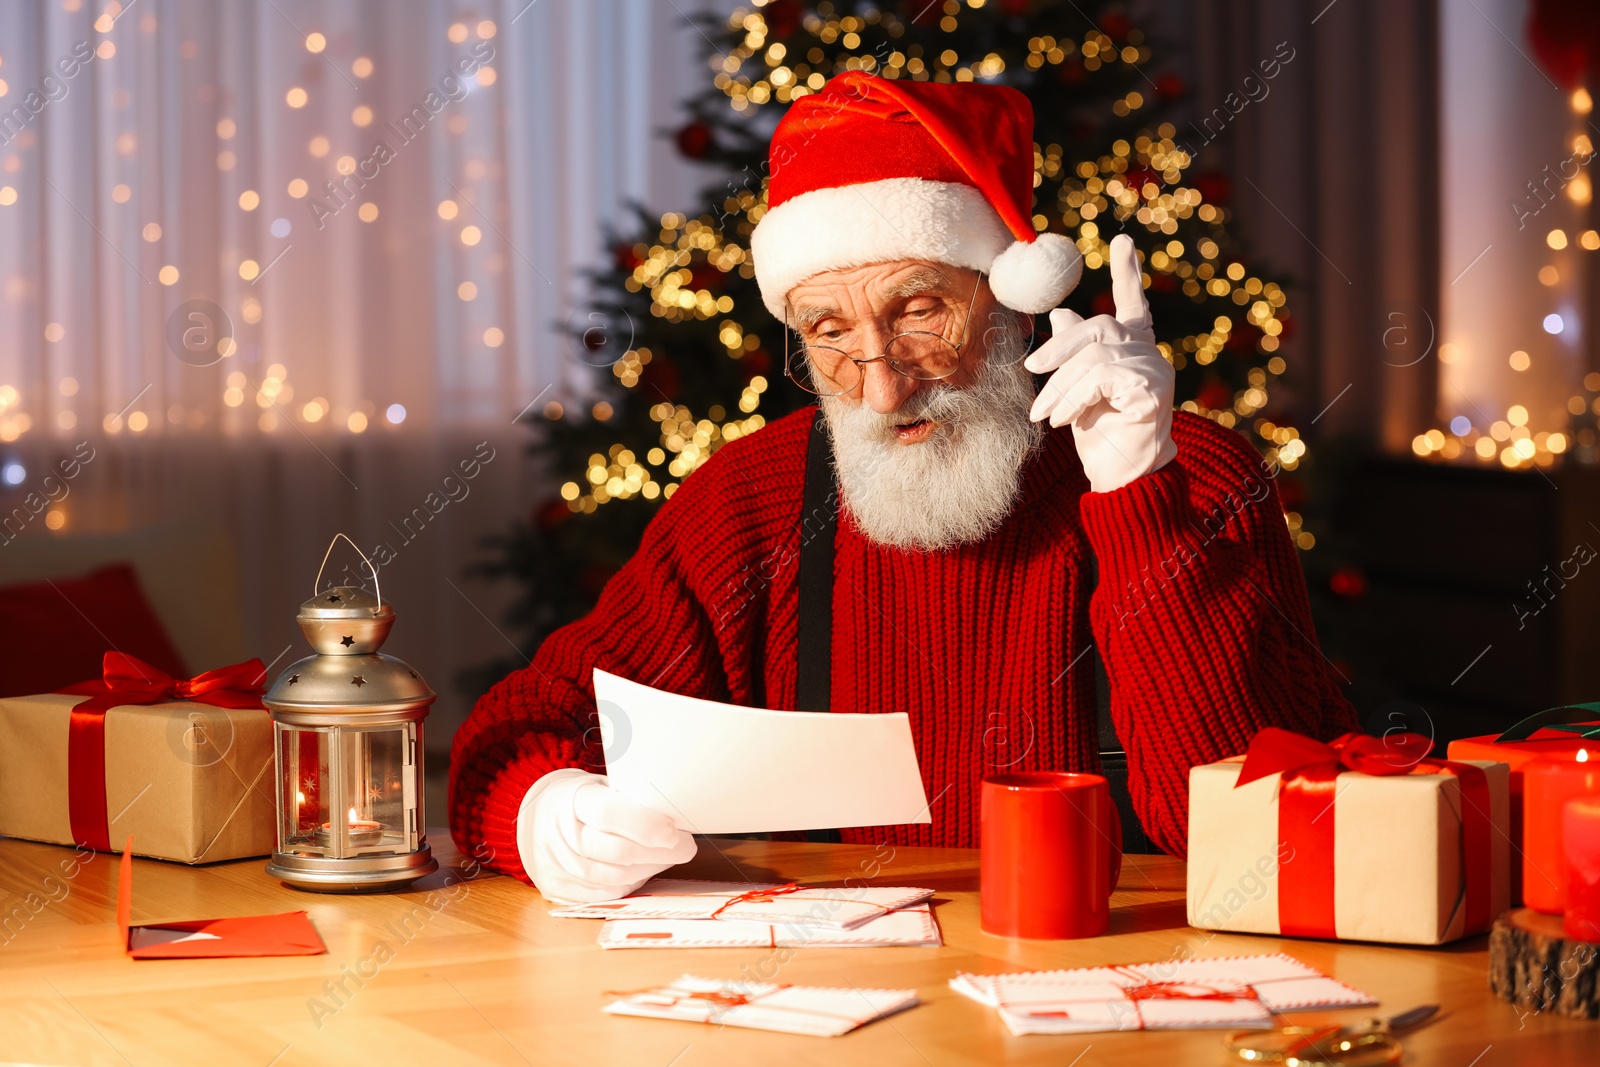 Photo of Santa Claus reading letter at his workplace in room with Christmas tree